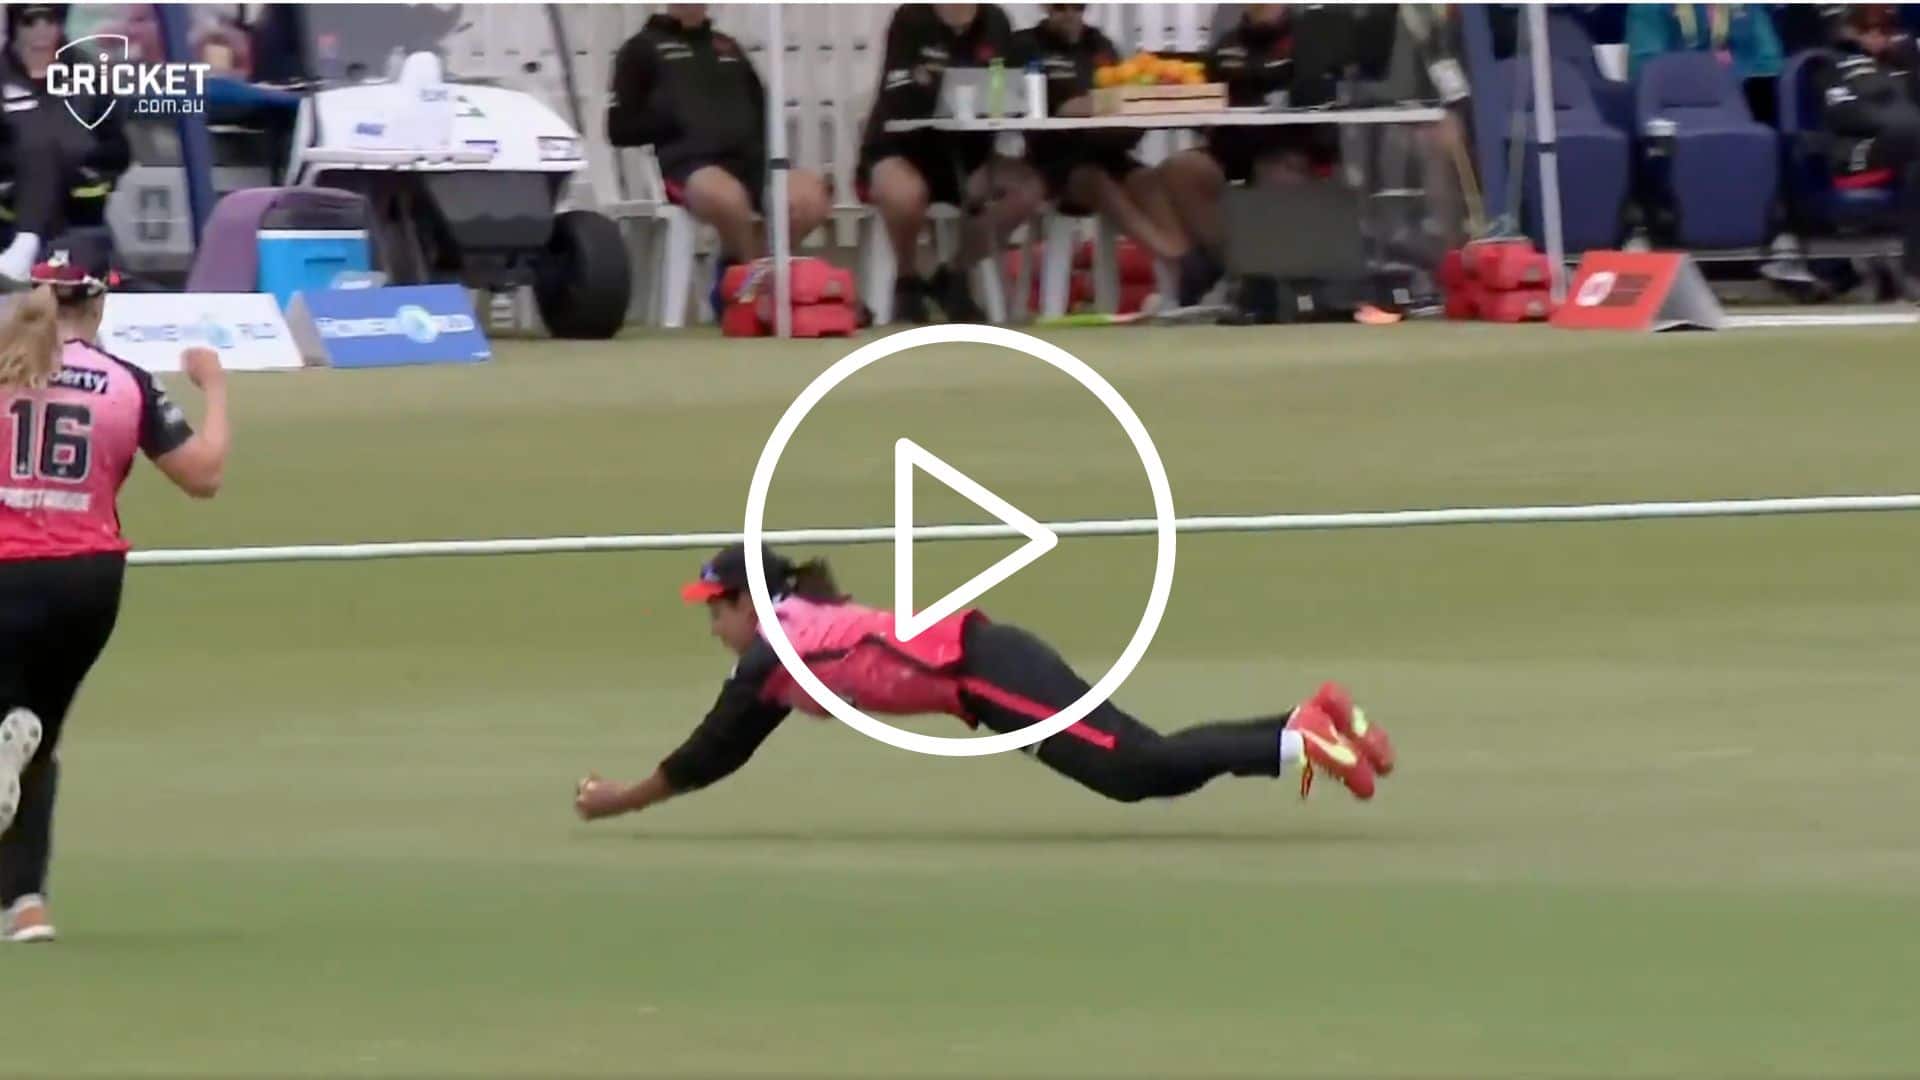 [Watch] Harmanpreet Kaur Hangs On A Stunner For Renegades In WBBL 2023